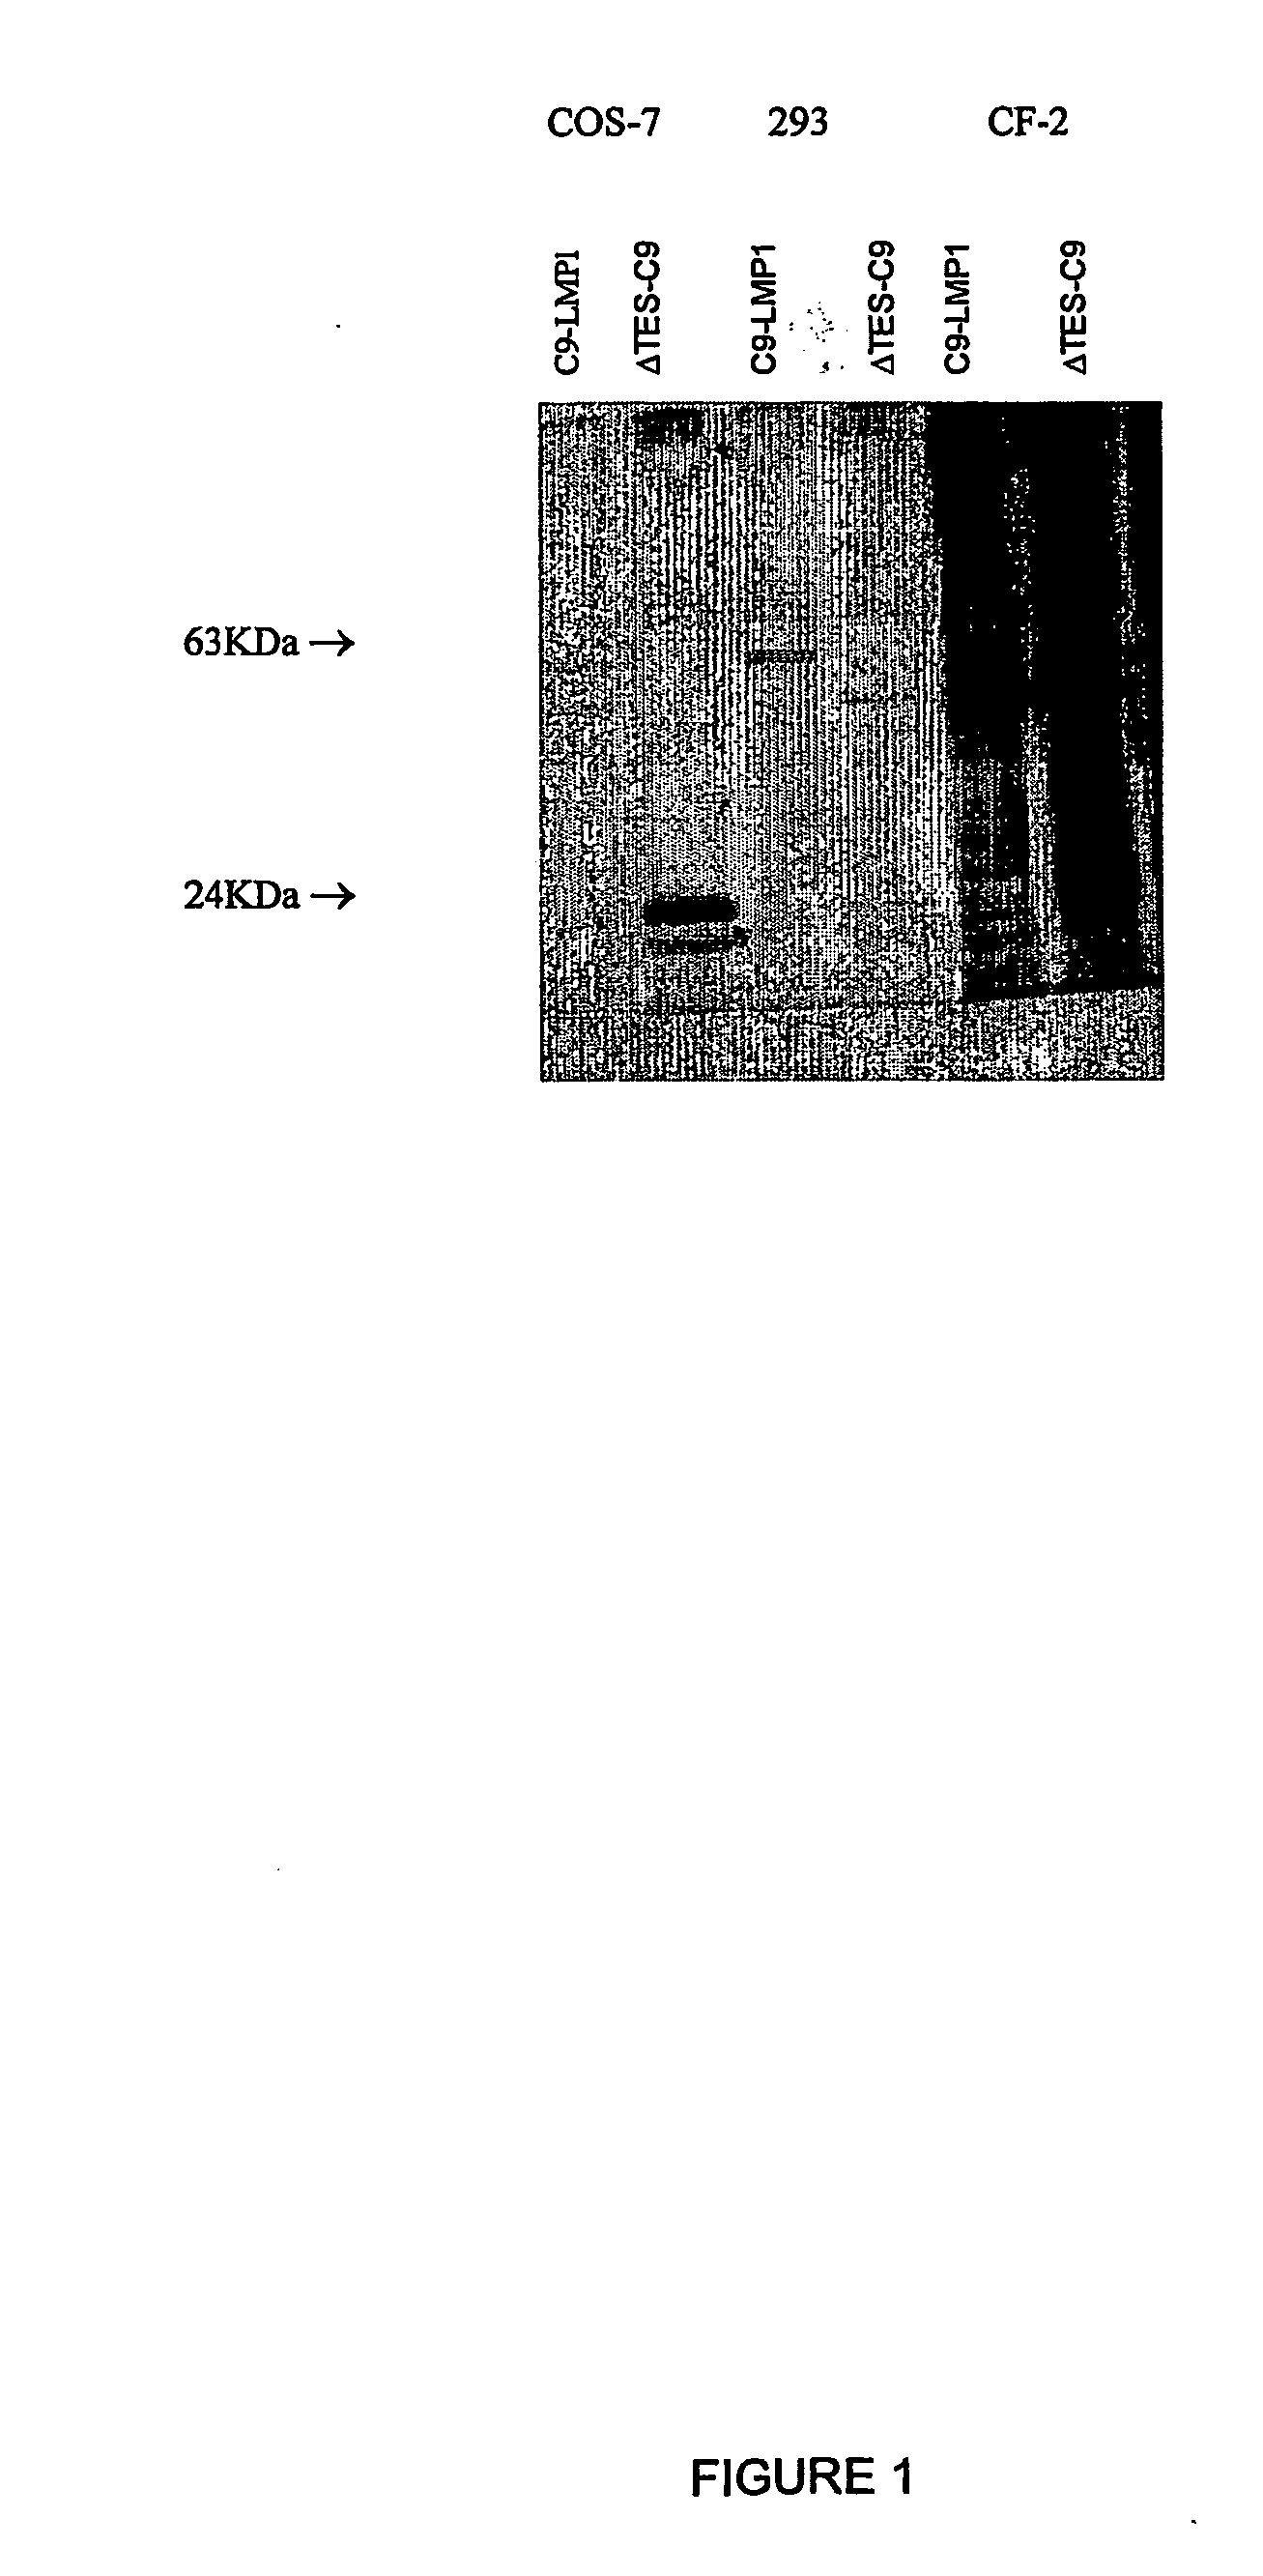 Antibody to latent membrane proteins and uses thereof